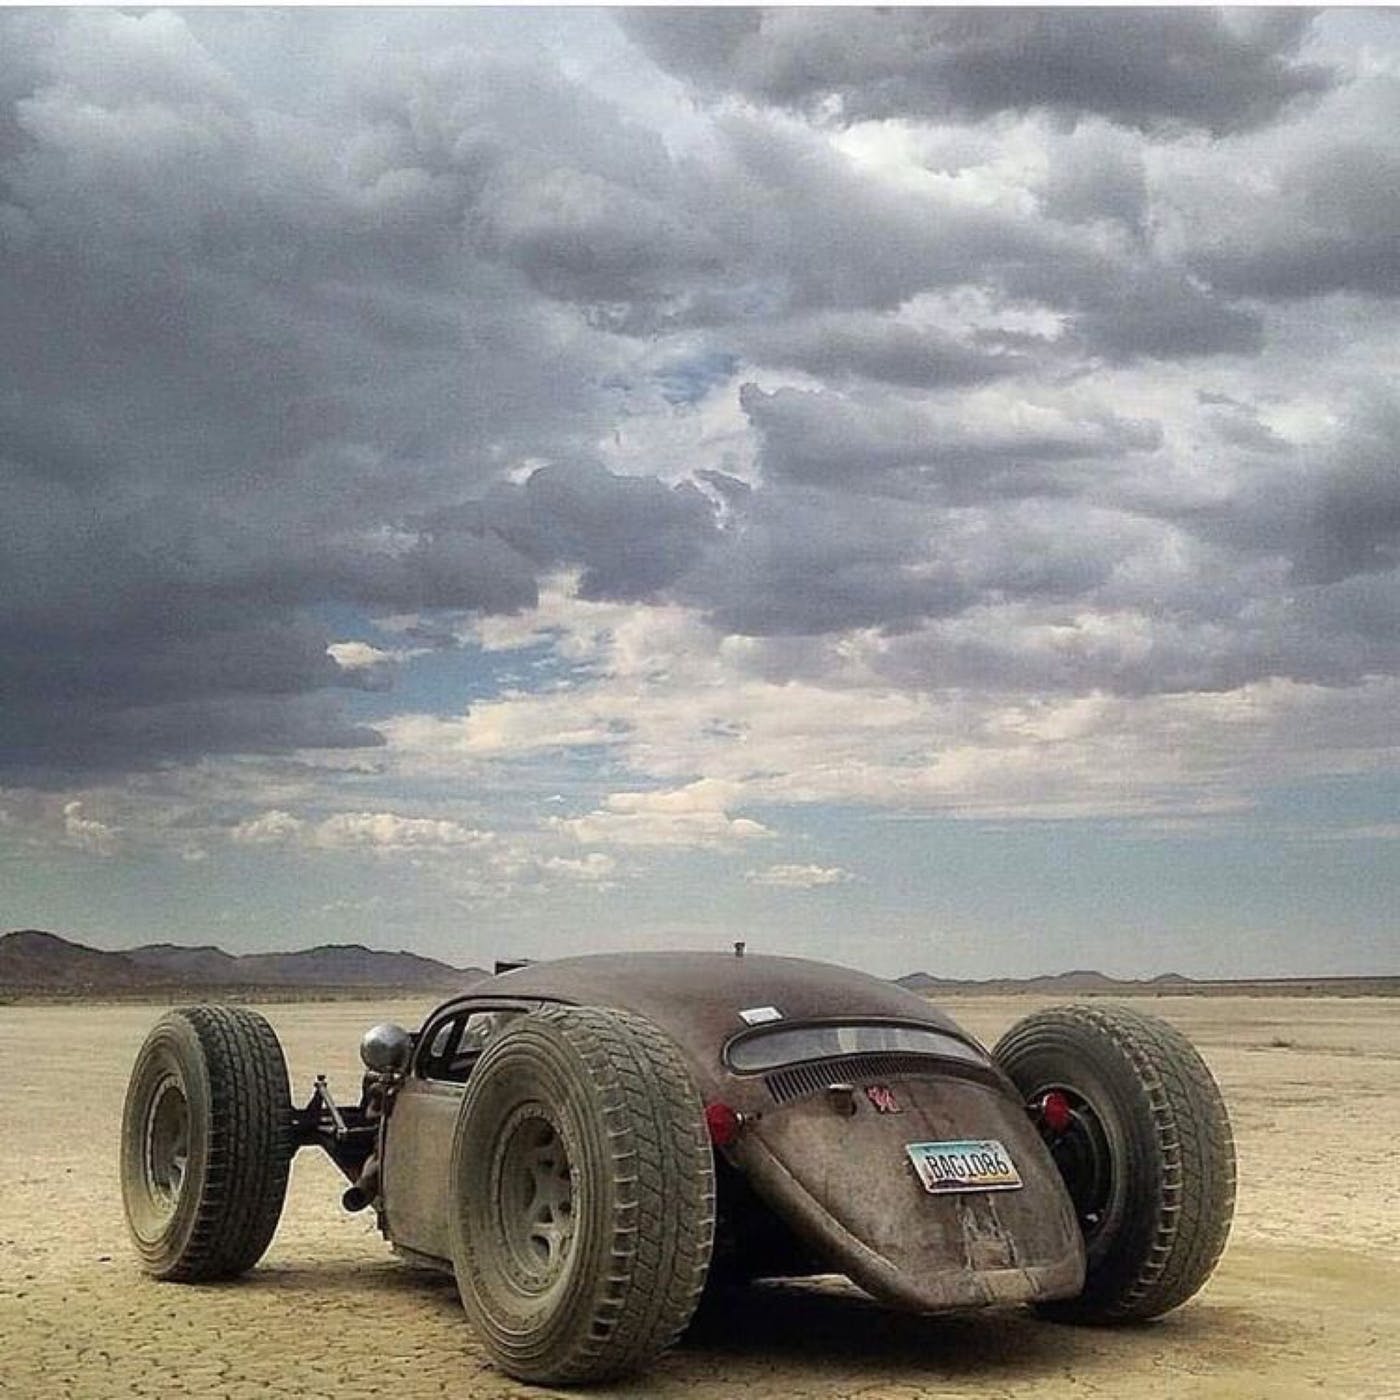 Awesome looking dune buggy in the desert with dramatic clouds.